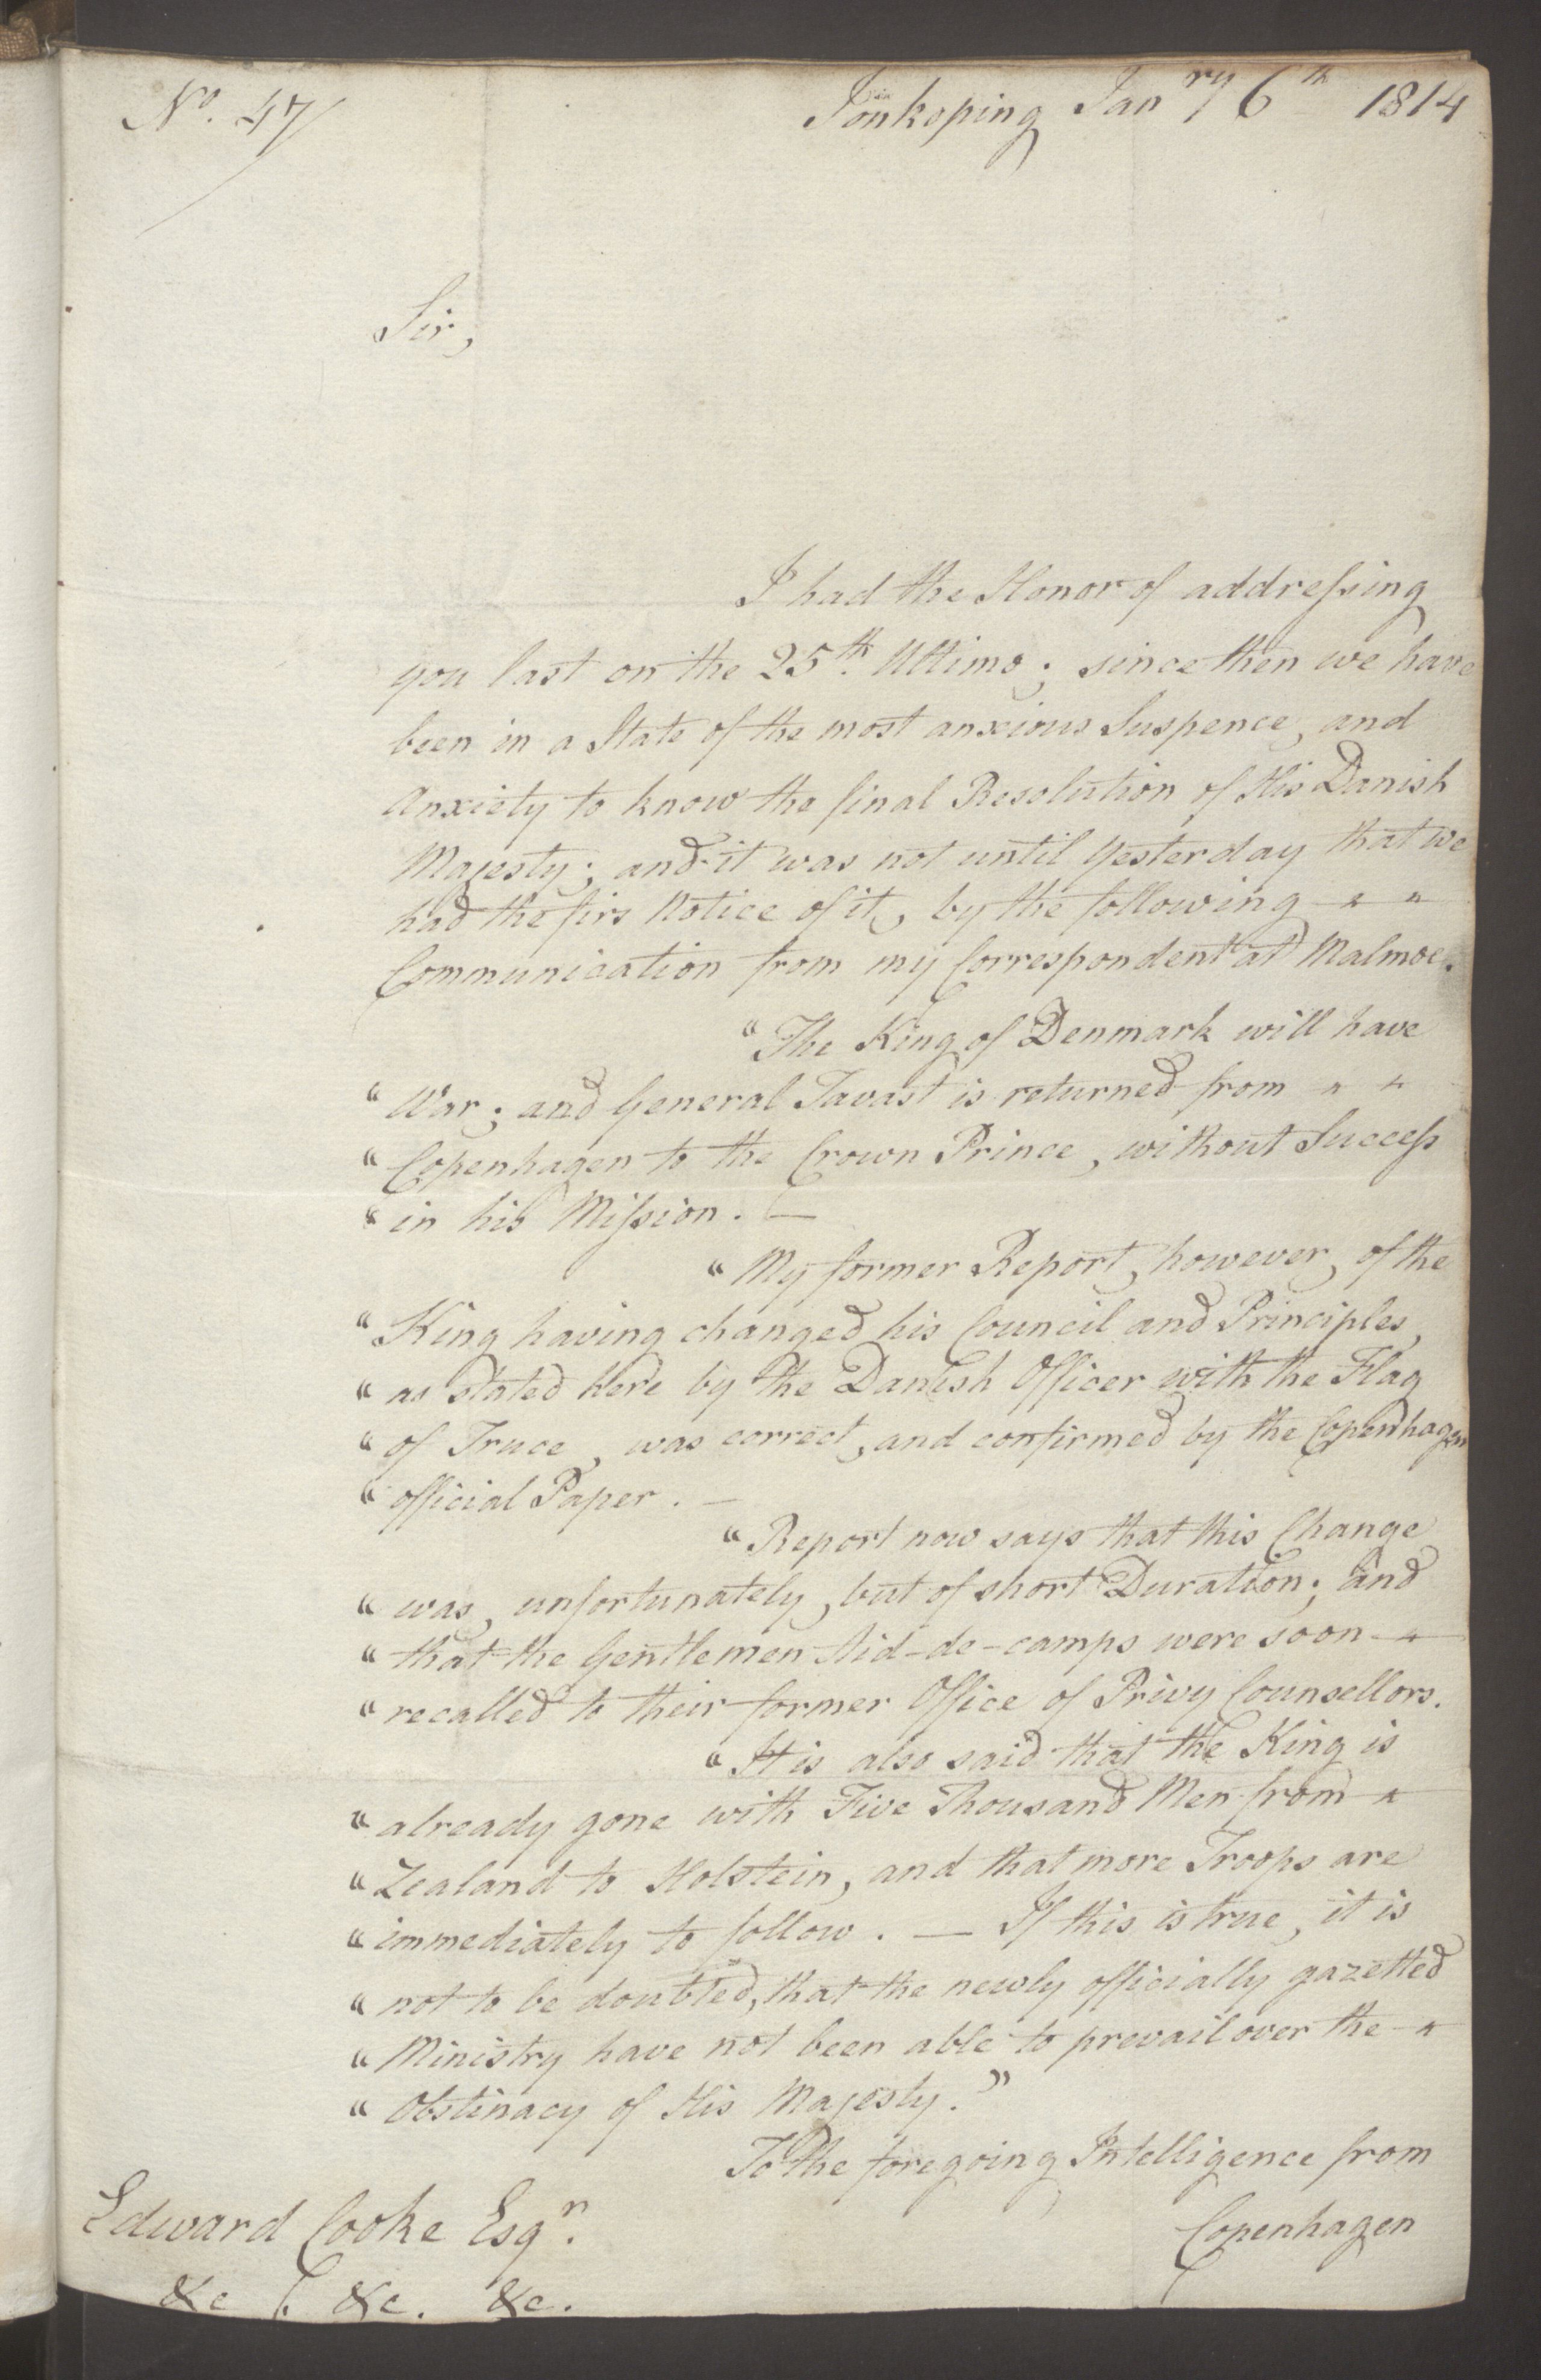 Foreign Office*, UKA/-/FO 38/16: Sir C. Gordon. Reports from Malmö, Jonkoping, and Helsingborg, 1814, p. 3